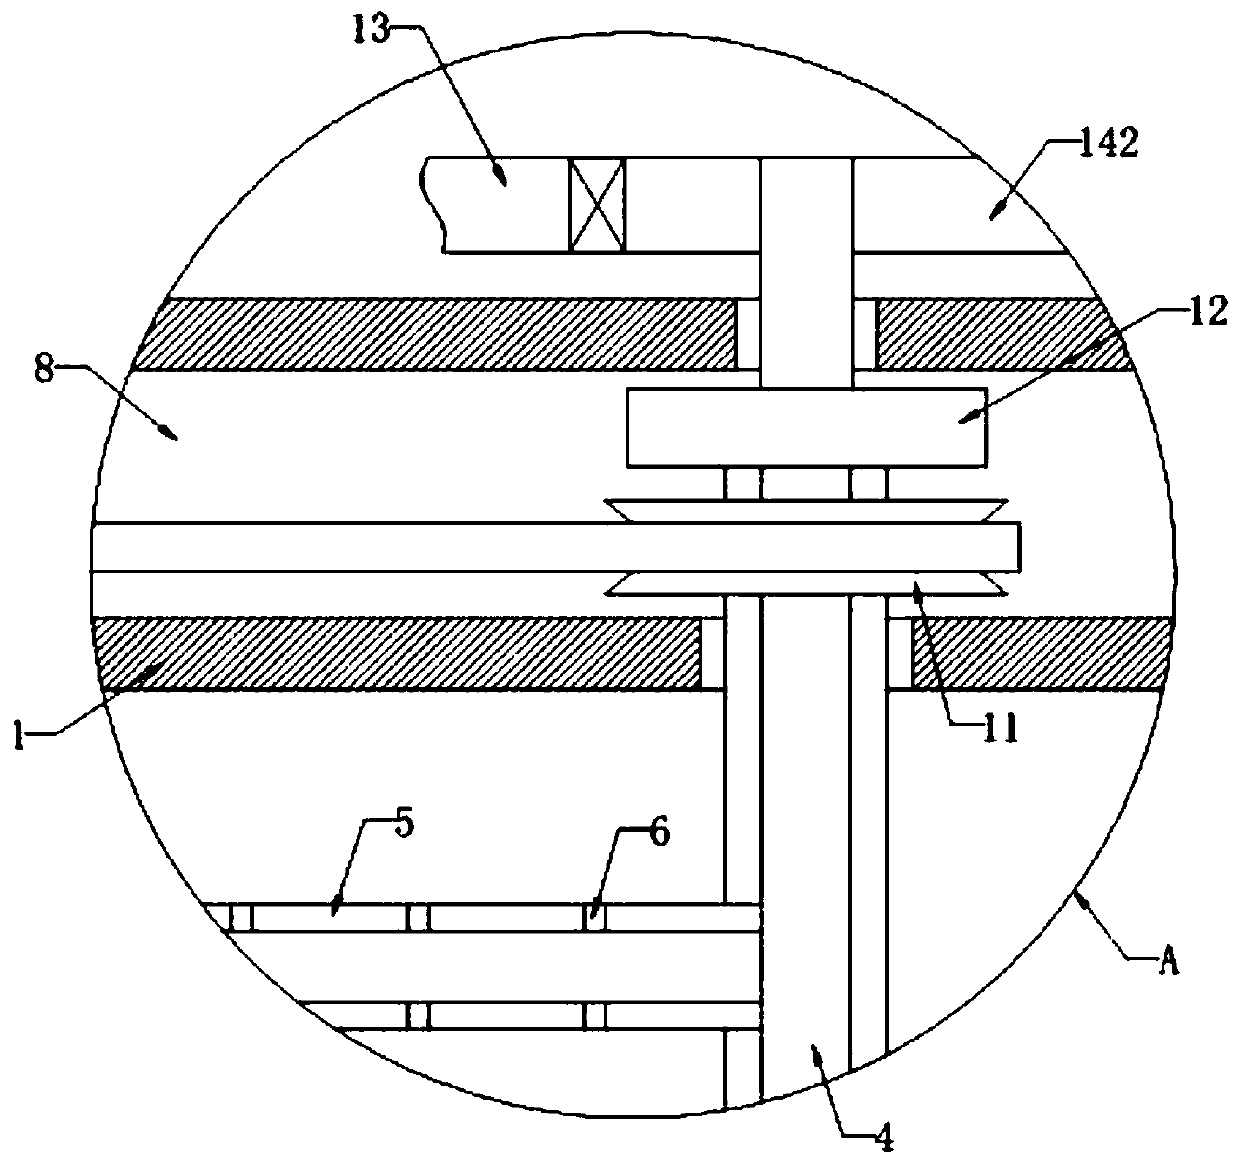 Rapid condensing device for extracting flavors and fragrances